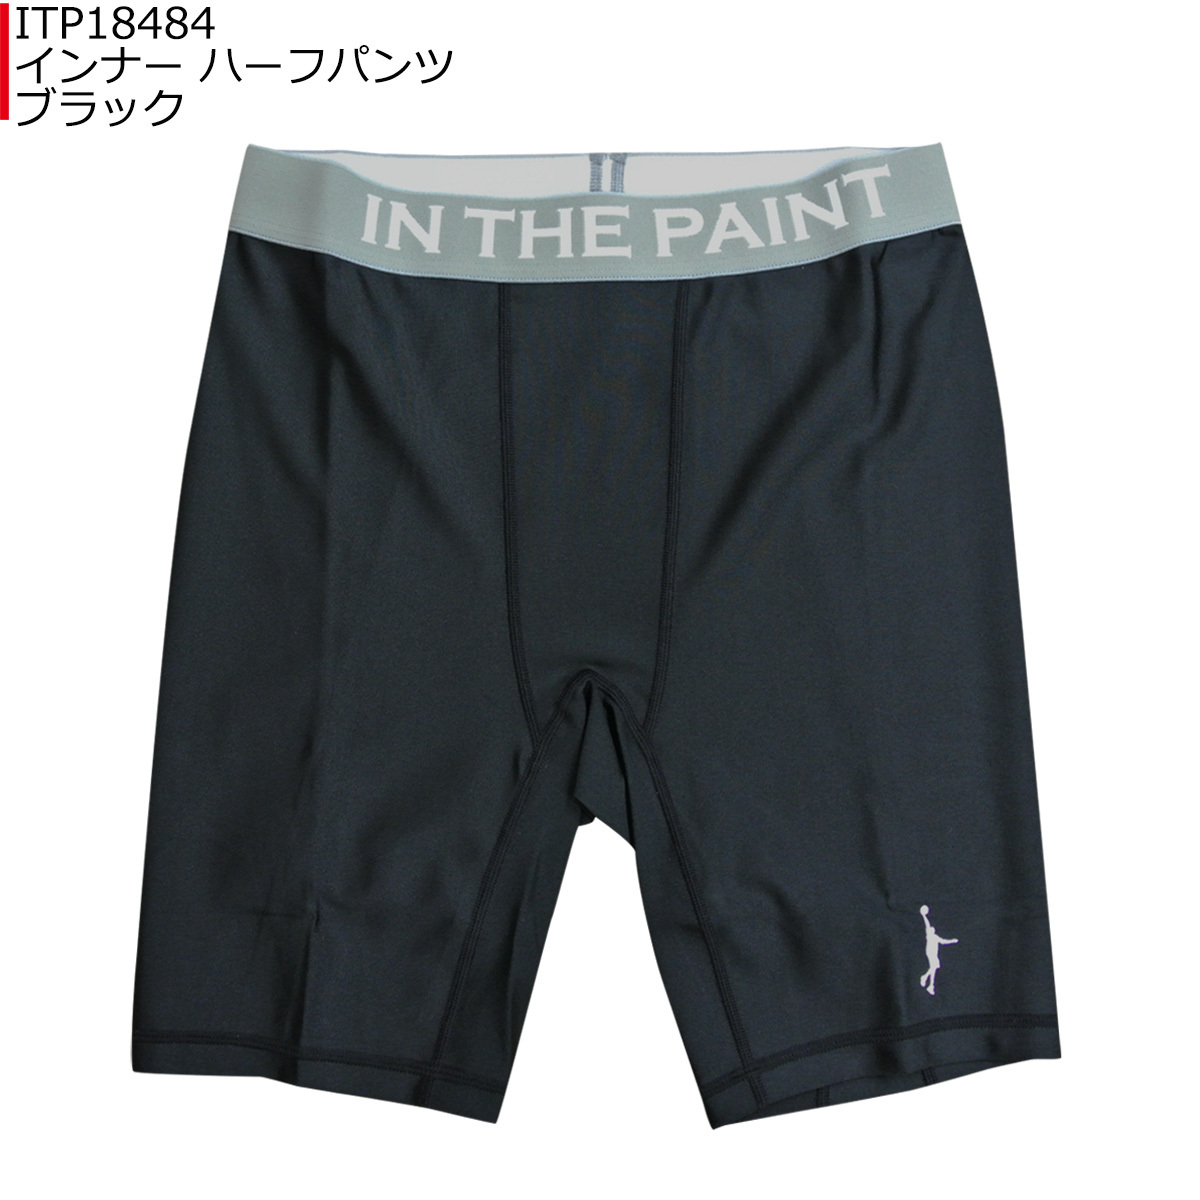 [1 point limit cat pohs correspondence ]IN THE PAINT in The paint ITP18484 inner shorts men's lady's basketball under wear 